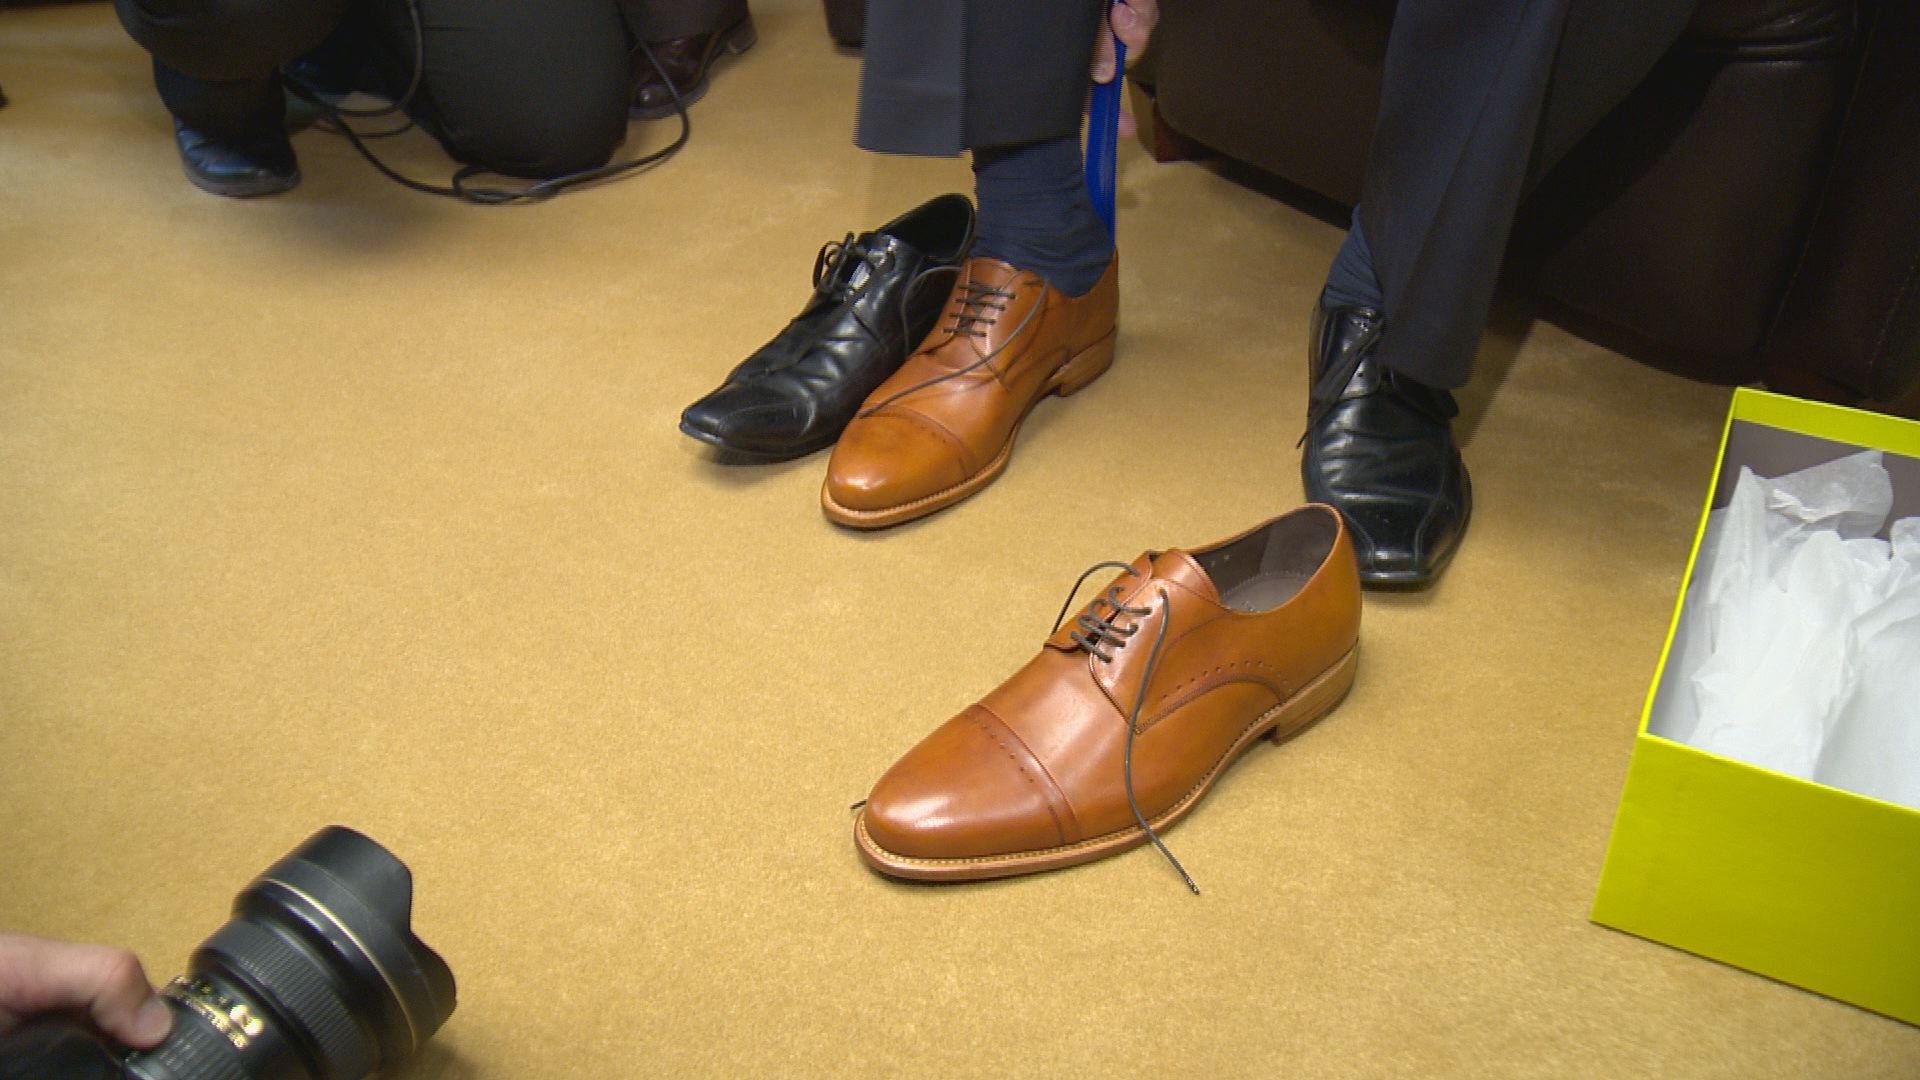 Saskatchewan finance minister reveals new 'tight' shoes in advance of  budget day